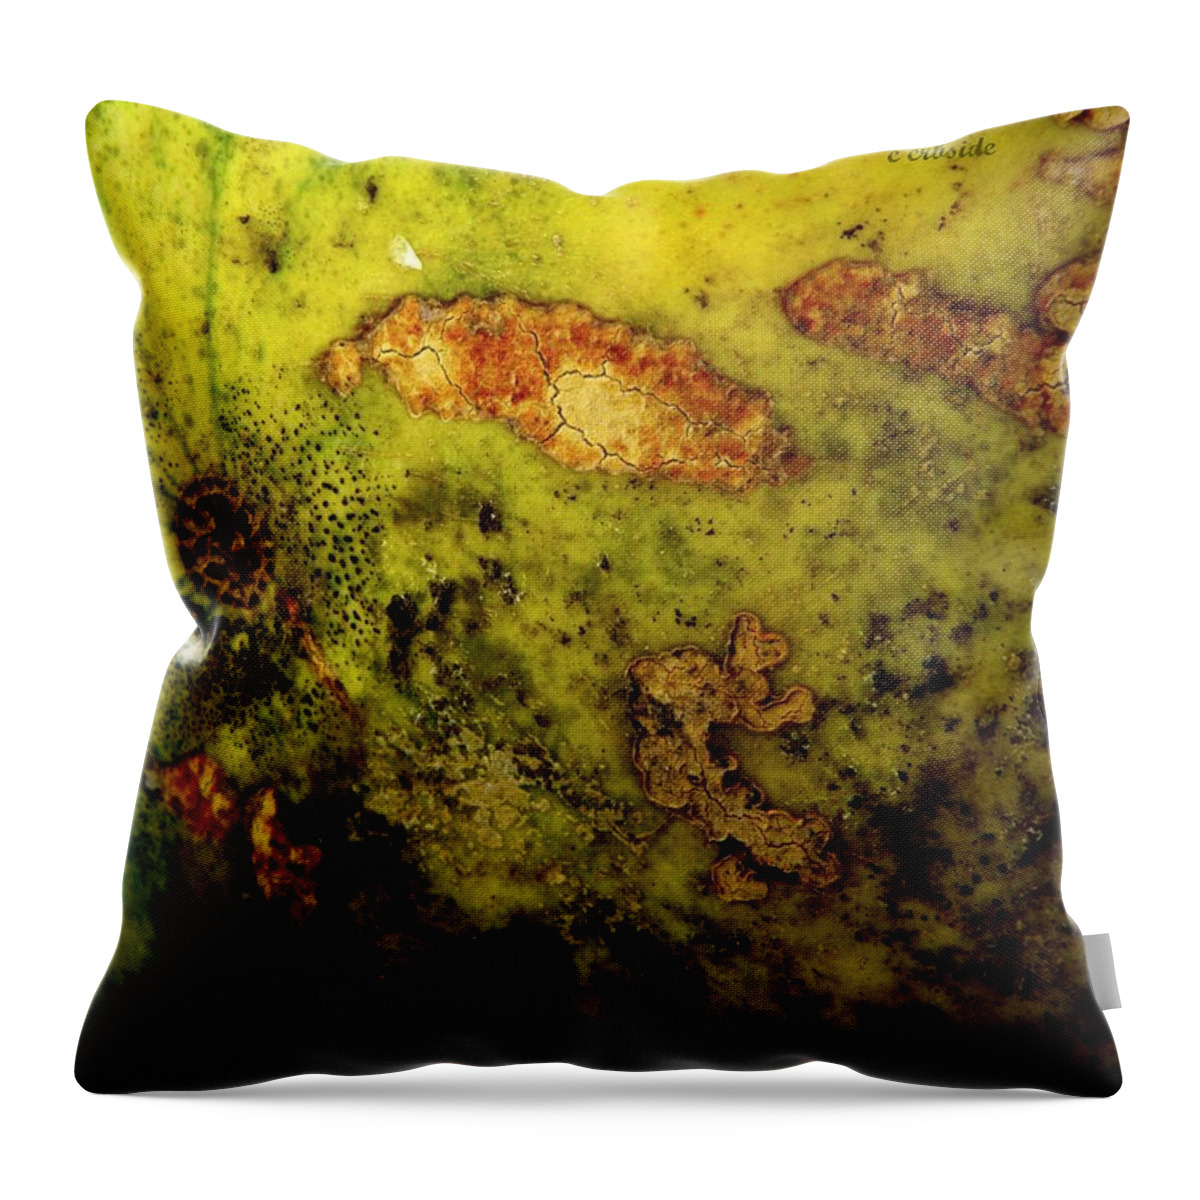 Melon Throw Pillow featuring the photograph Melon Rind by Chris Berry